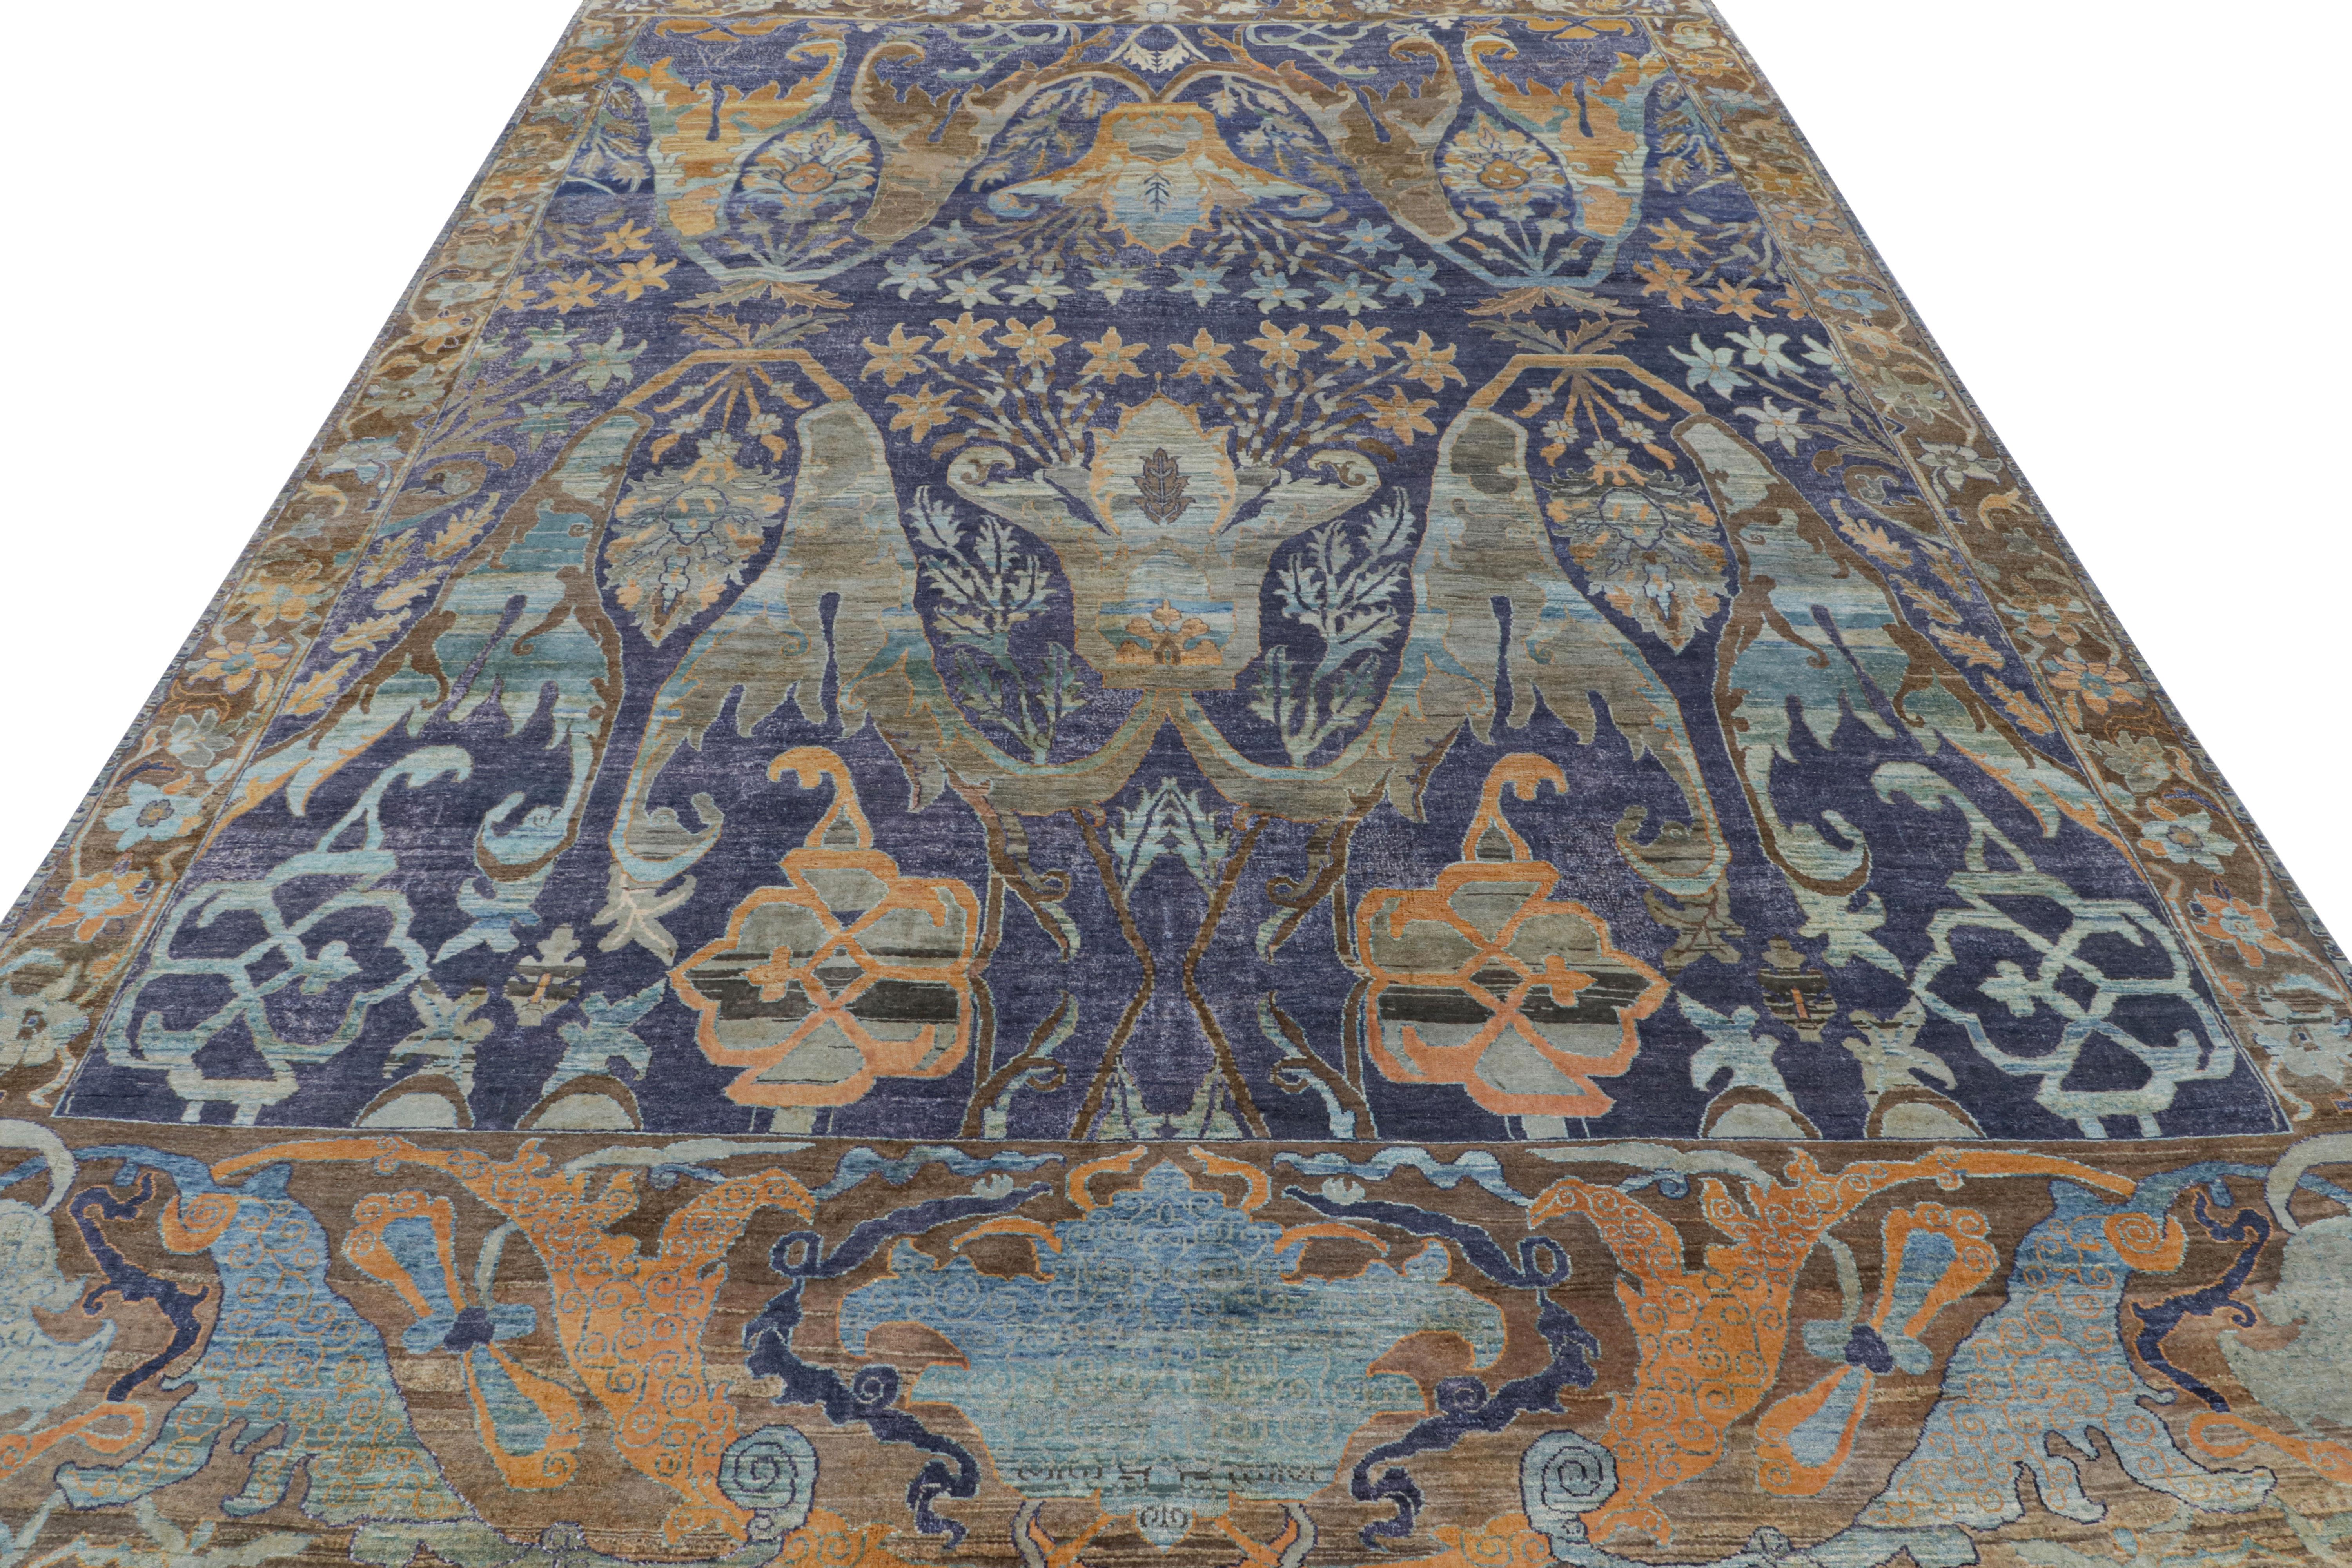 Indien Rug & Kilim's Oushak-Style Rug in Indigo, Brown and Brown Floral Patterns (tapis de style Oushak à motifs floraux indigo, bruns et bruns) en vente